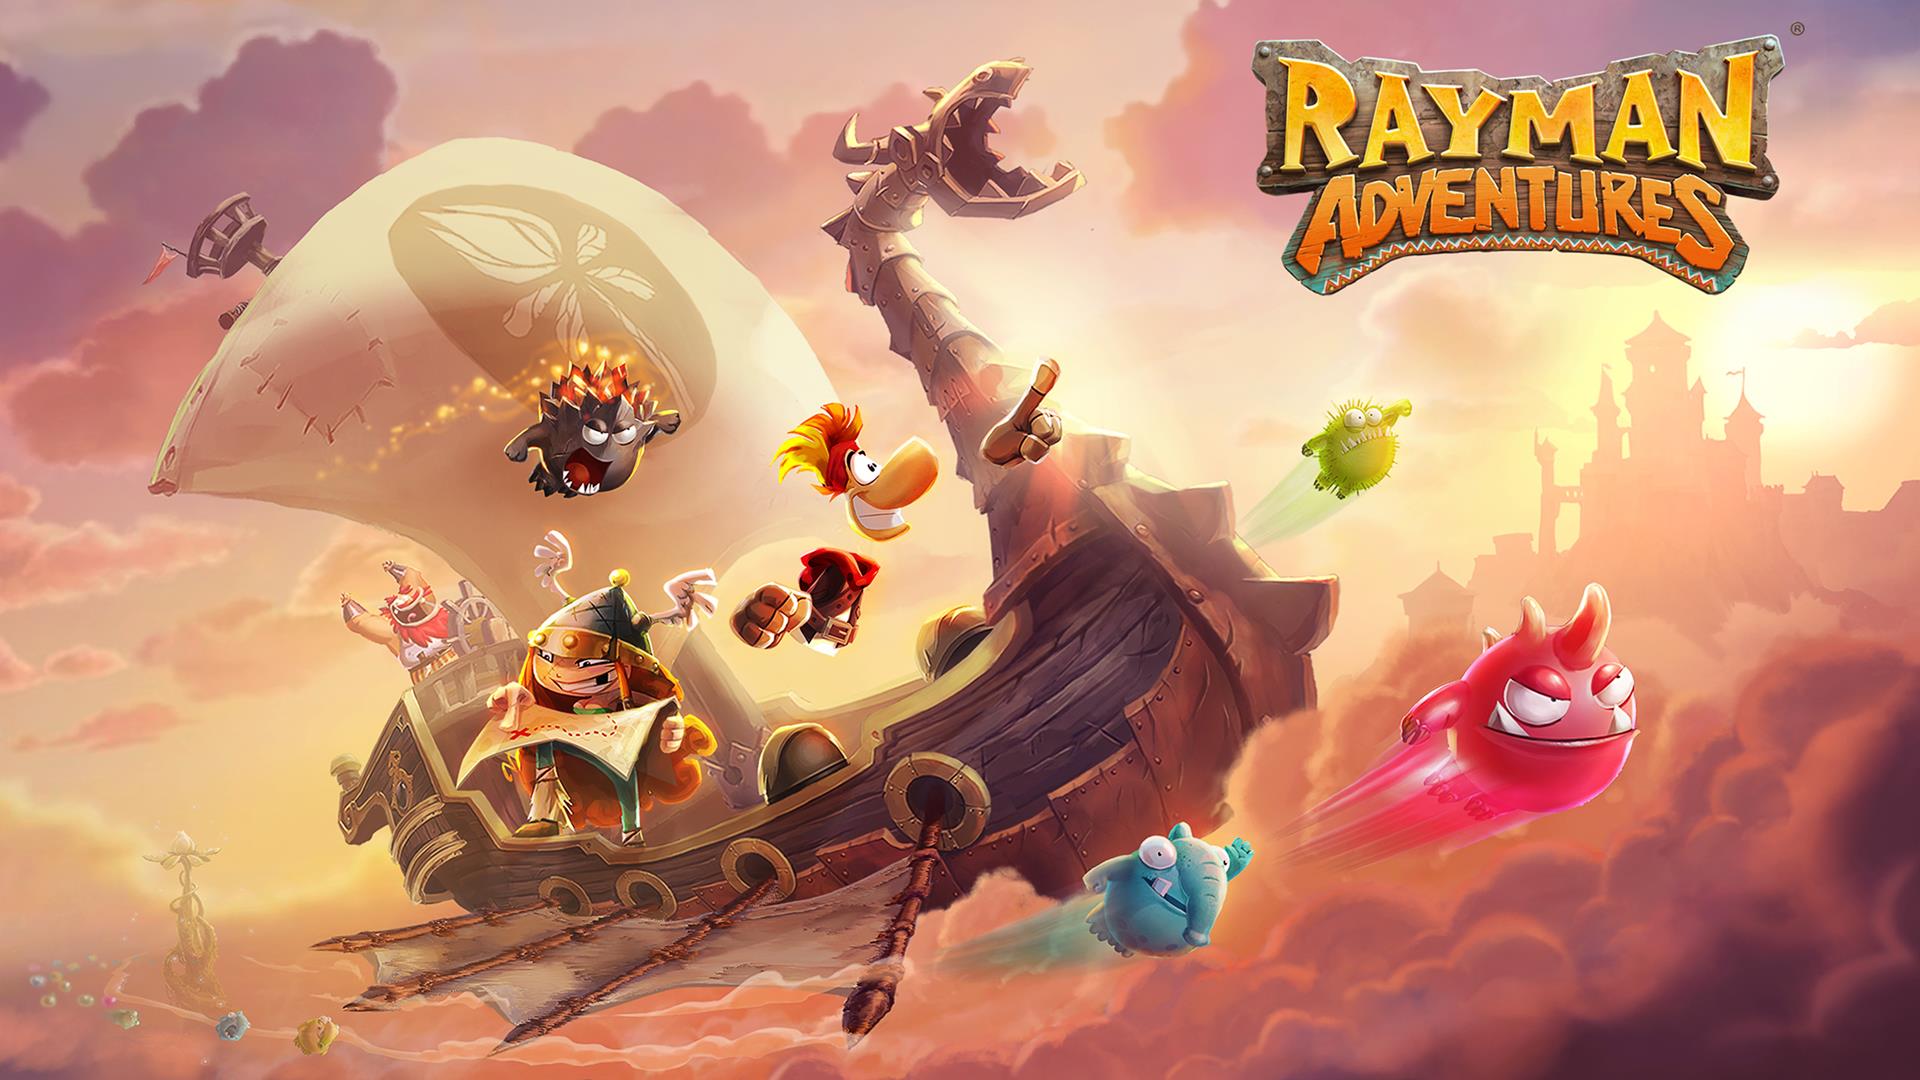 Image for There's a new Rayman game in development, but don't get excited